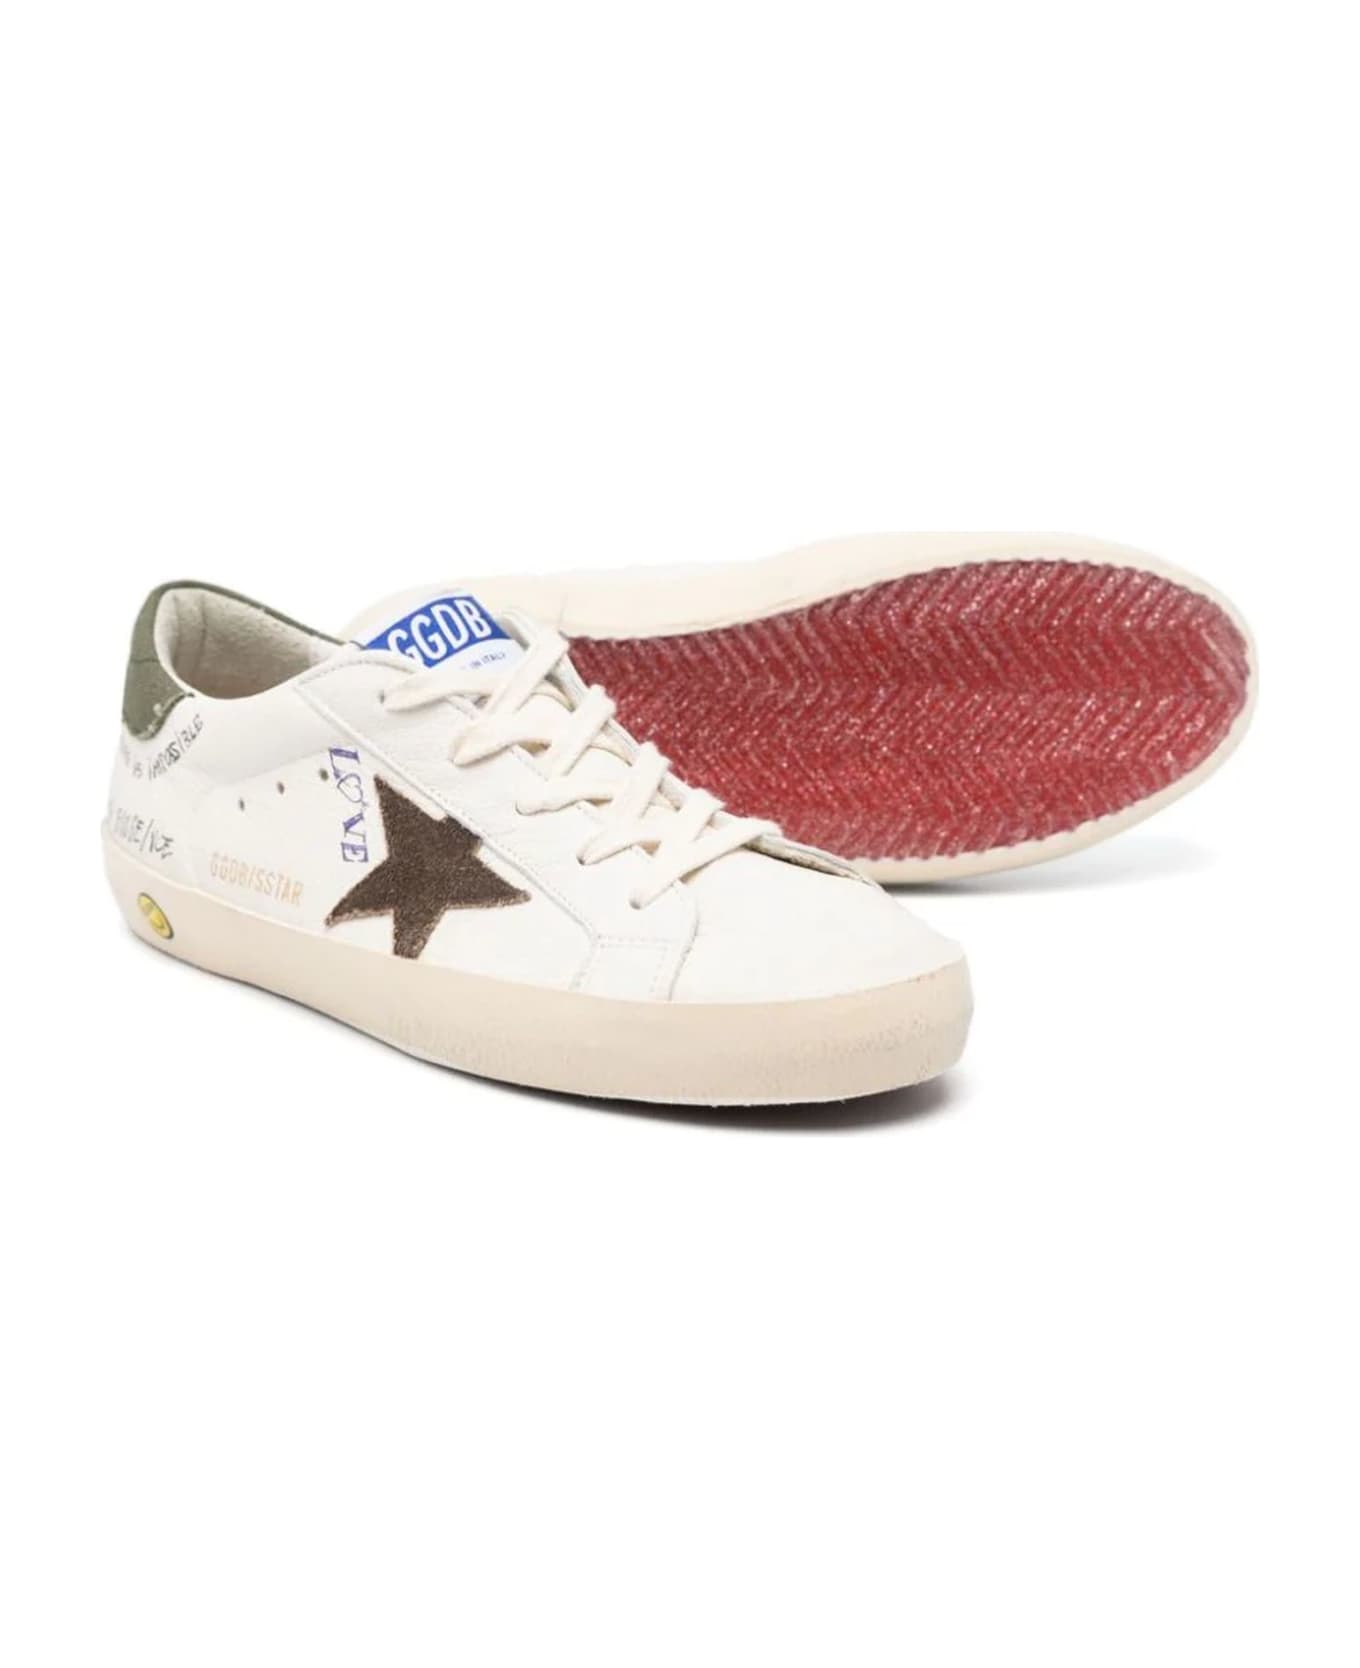 Golden Goose White Leather Sneakers - White/brown/green シューズ